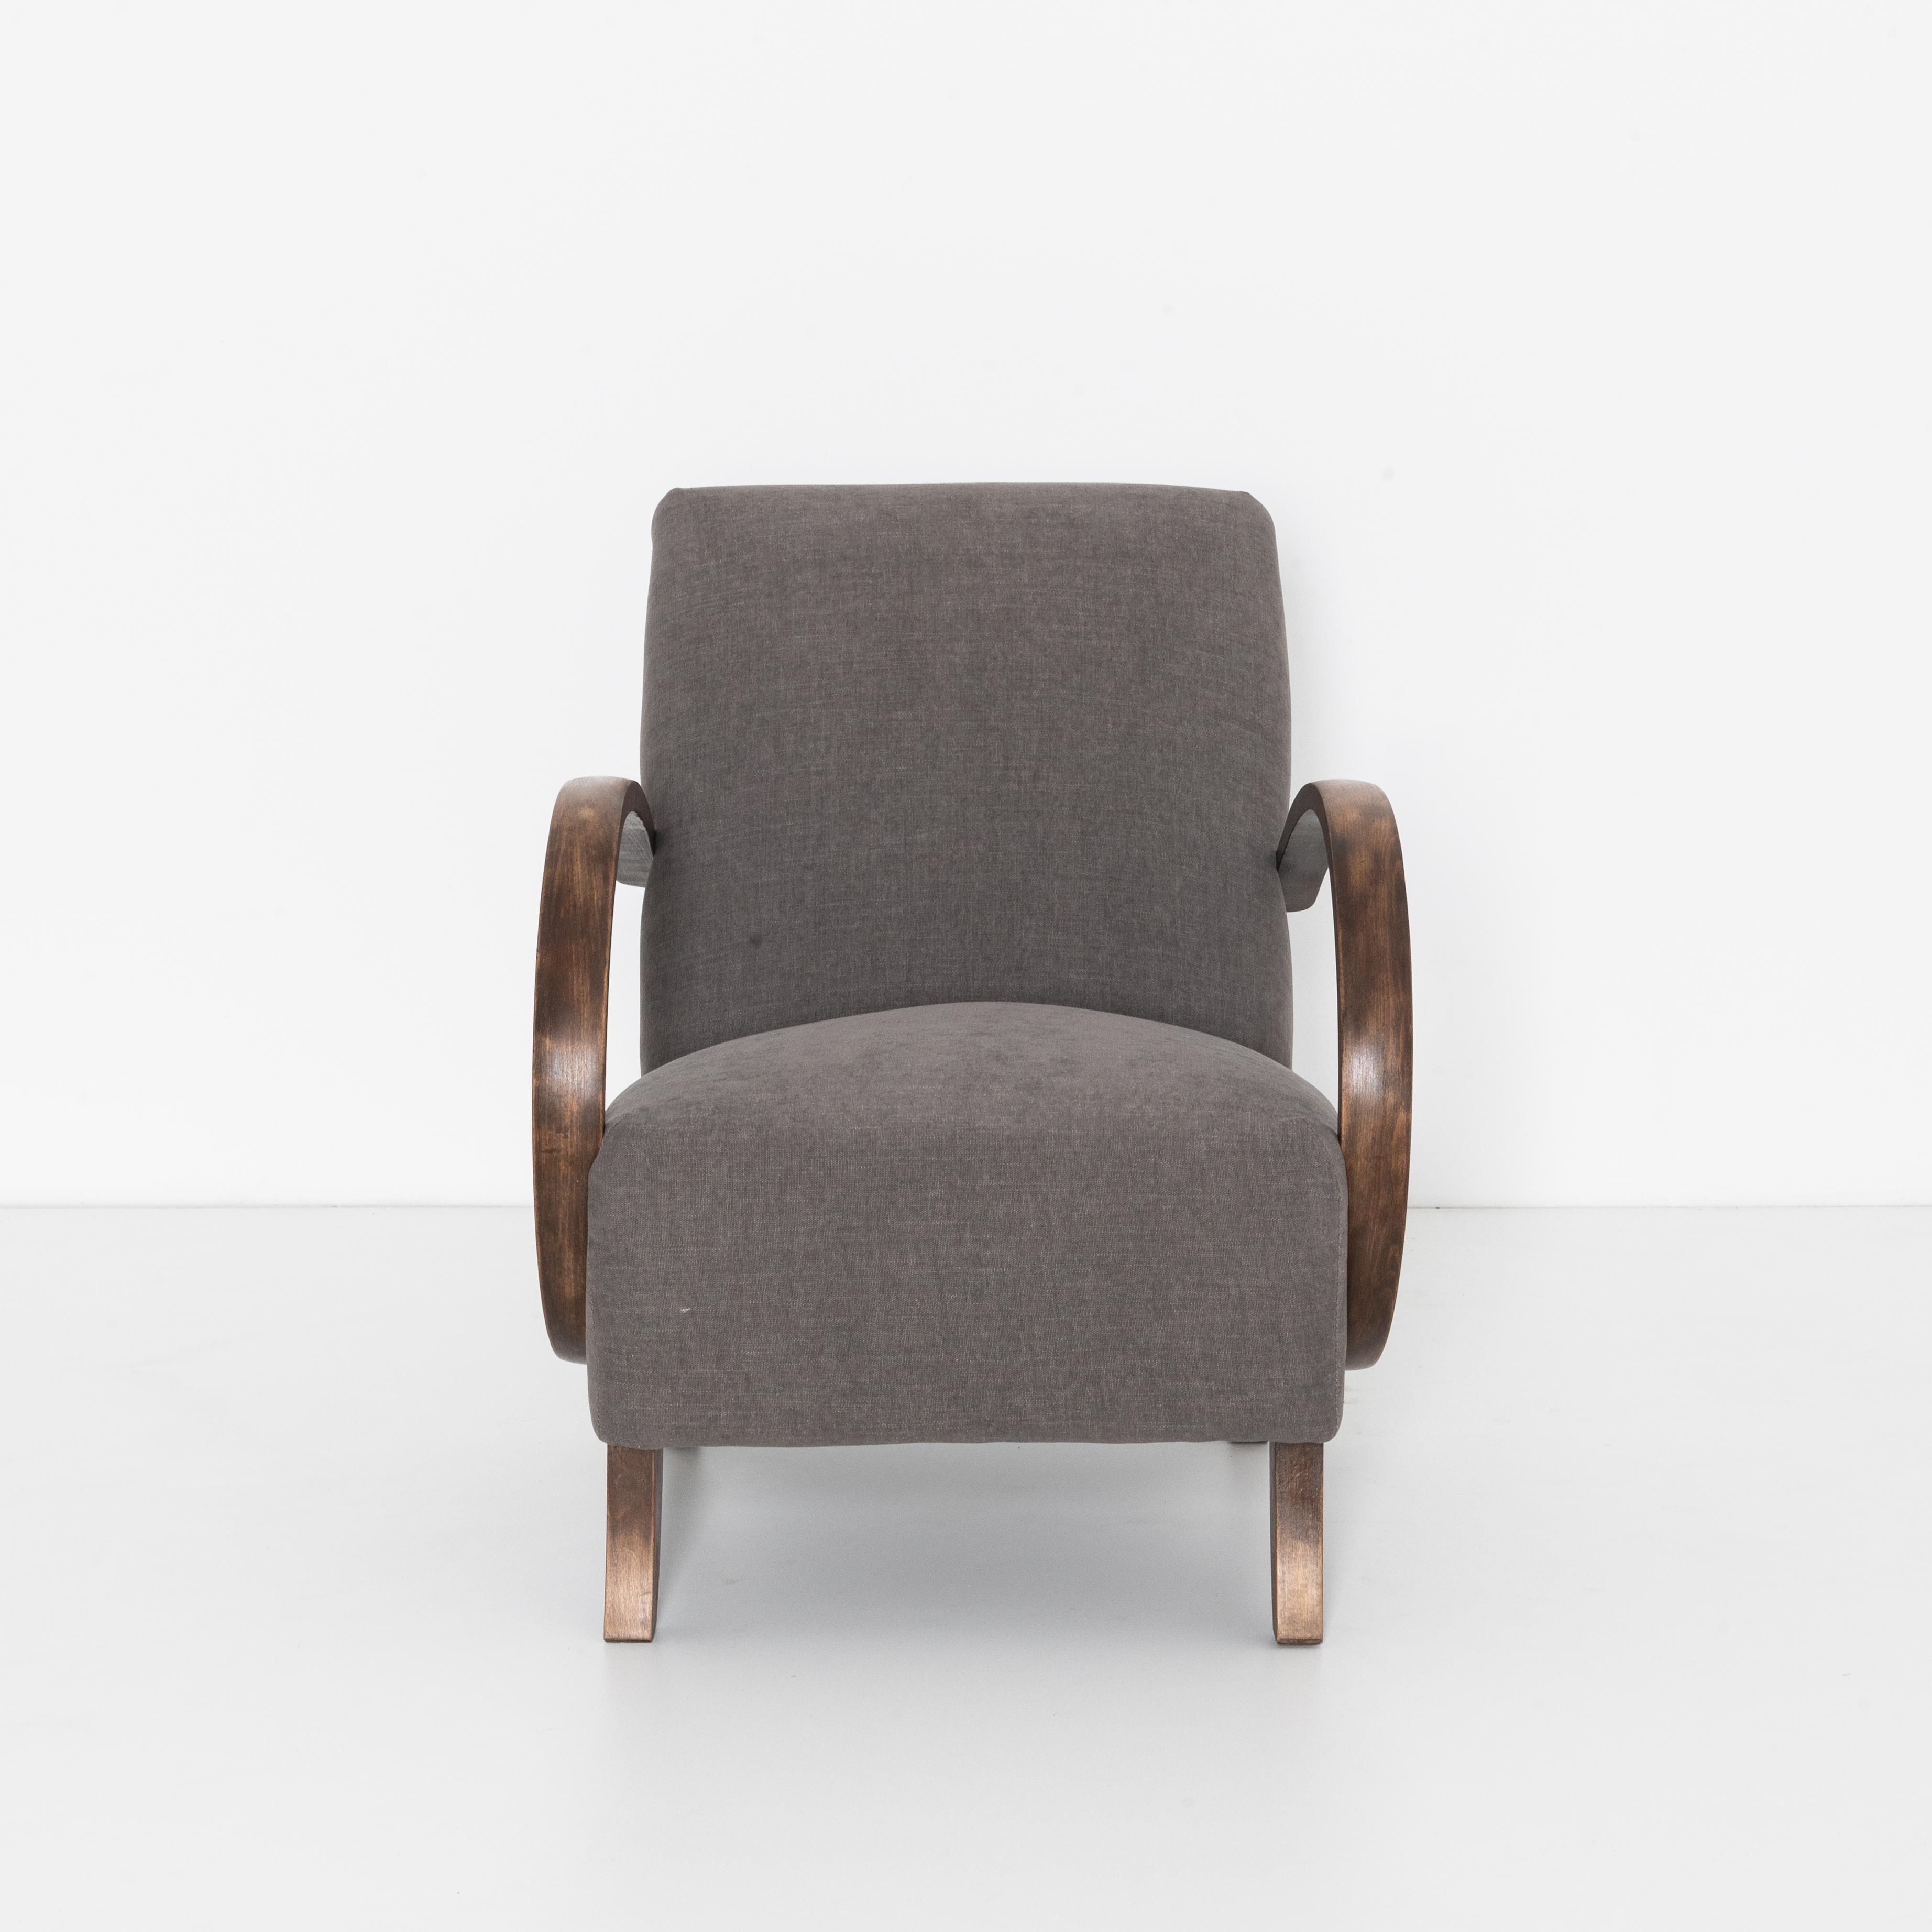 Mid-Century Modern upholstered armchair from Czech Republic, circa 1960. A timeless approach that still looks contemporary and fresh. In the style of Jindrich Halabala with bent beech armrests and geometric legs, re-upholstered with a grey